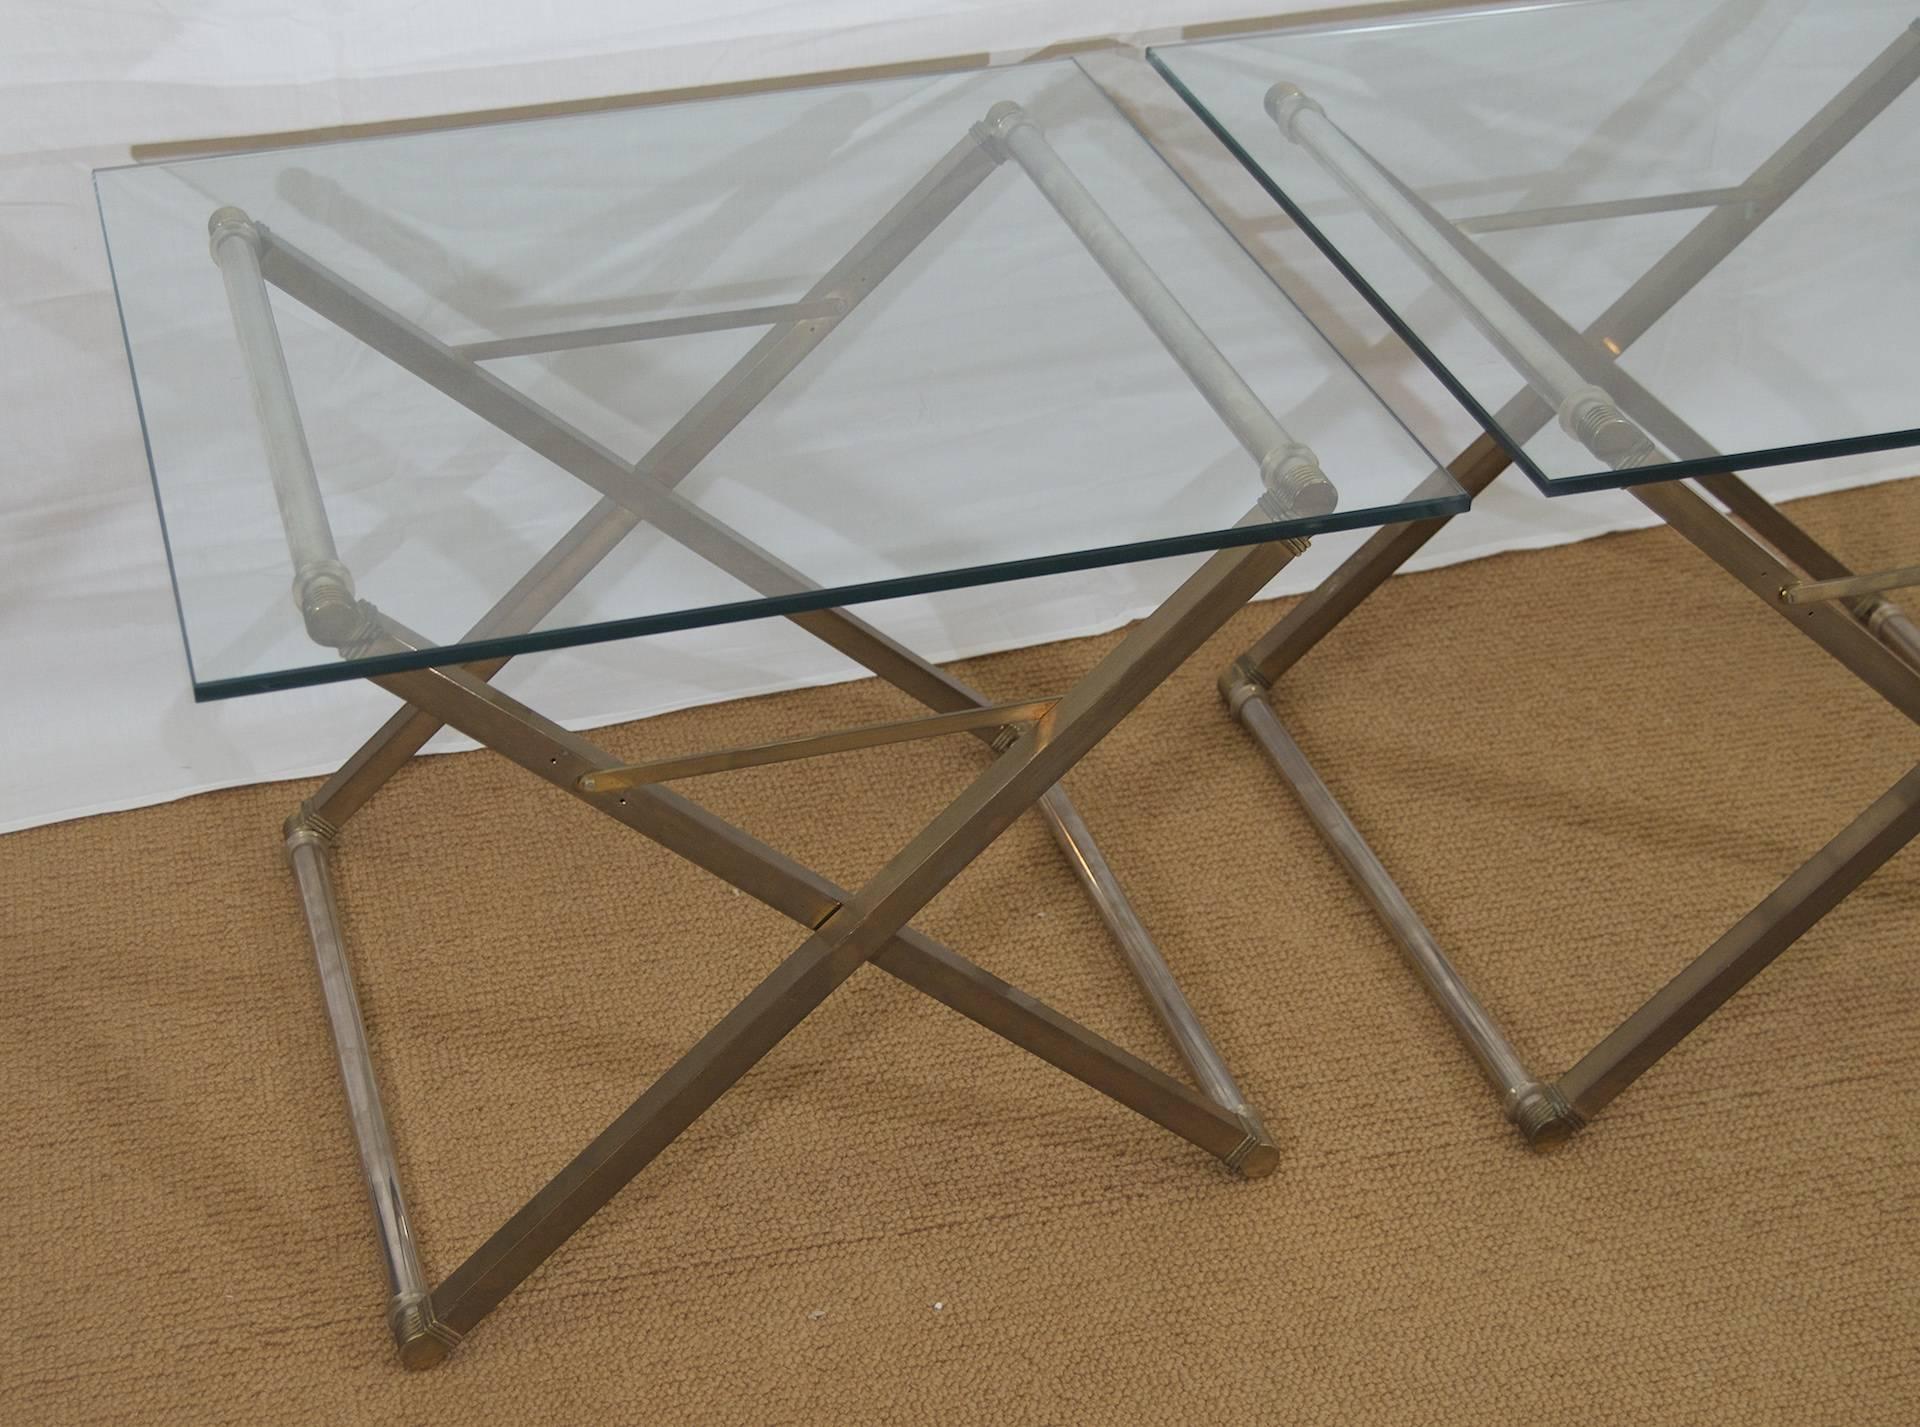 Pair of bronze and steel X-form based tables with a square glass top.

Please note the height of the tables is adjustable by screw-fitted cross brace. Height listed is middle height setting. Minimum height is 13.25 inches and maximum is 18.25